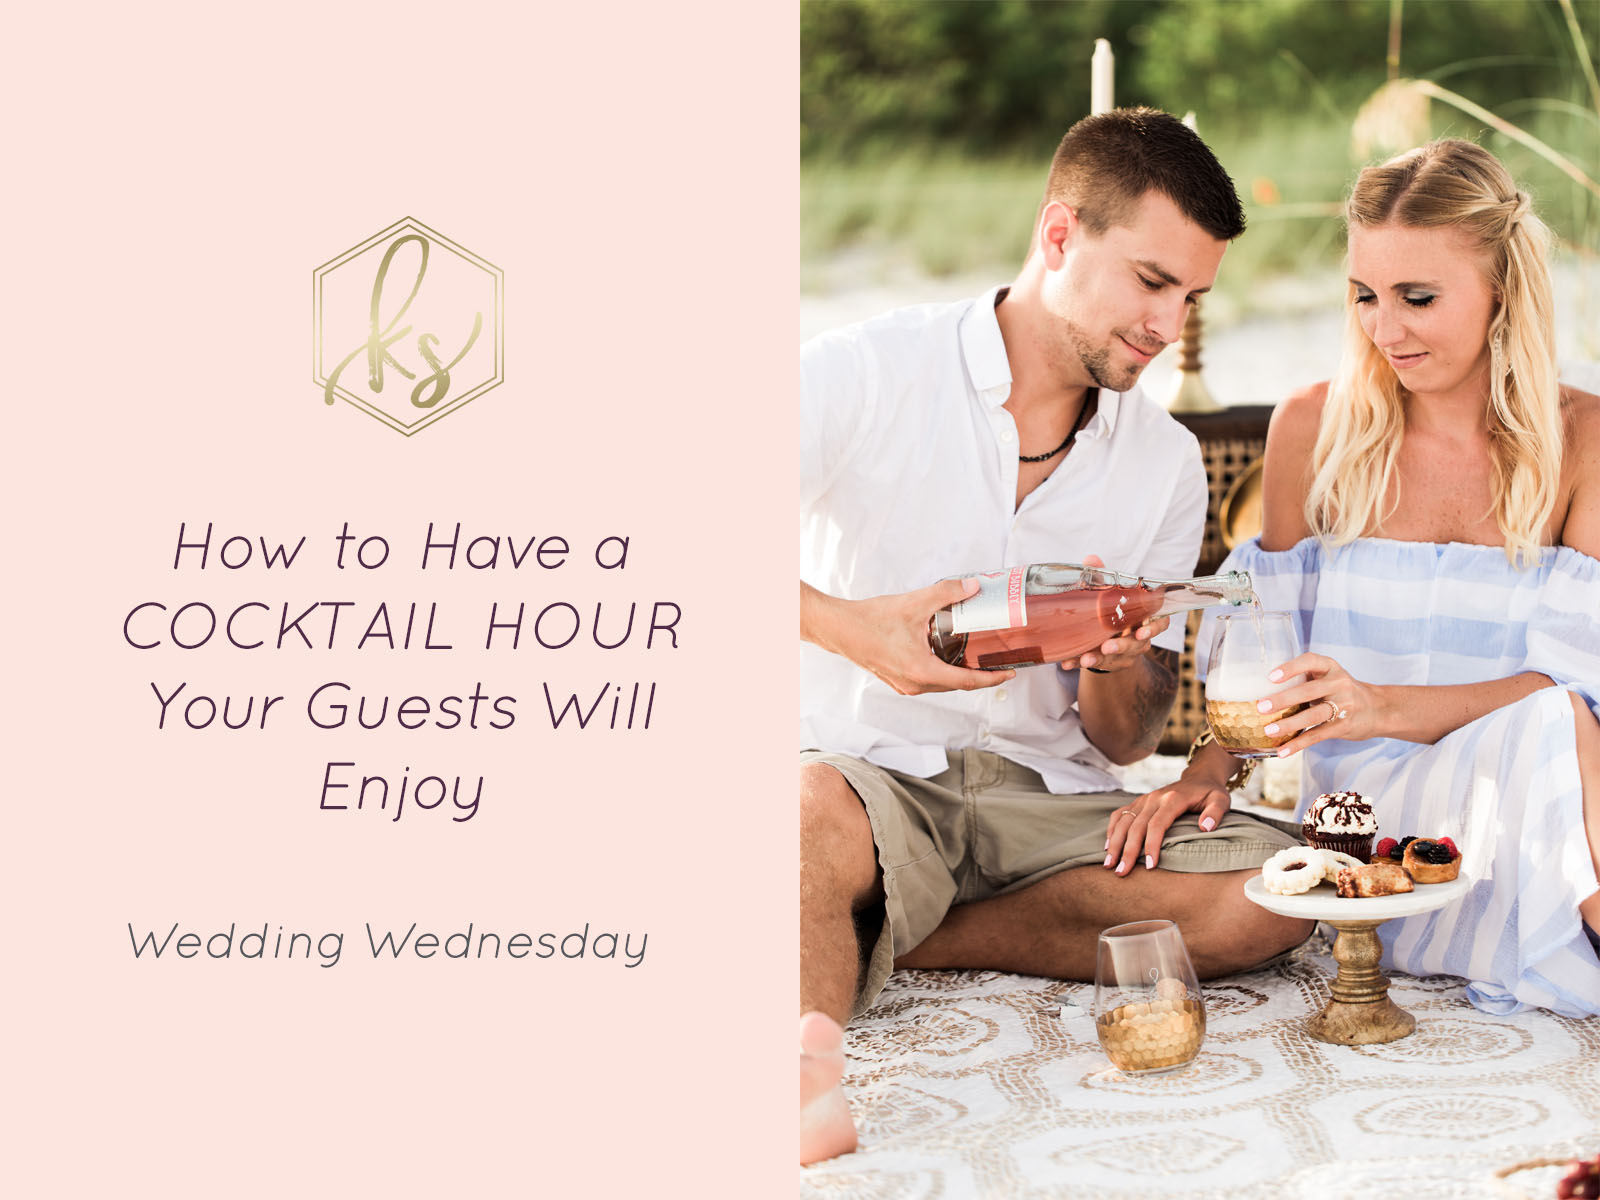 How to Plan a Cocktail Hour Your Guests Will Love